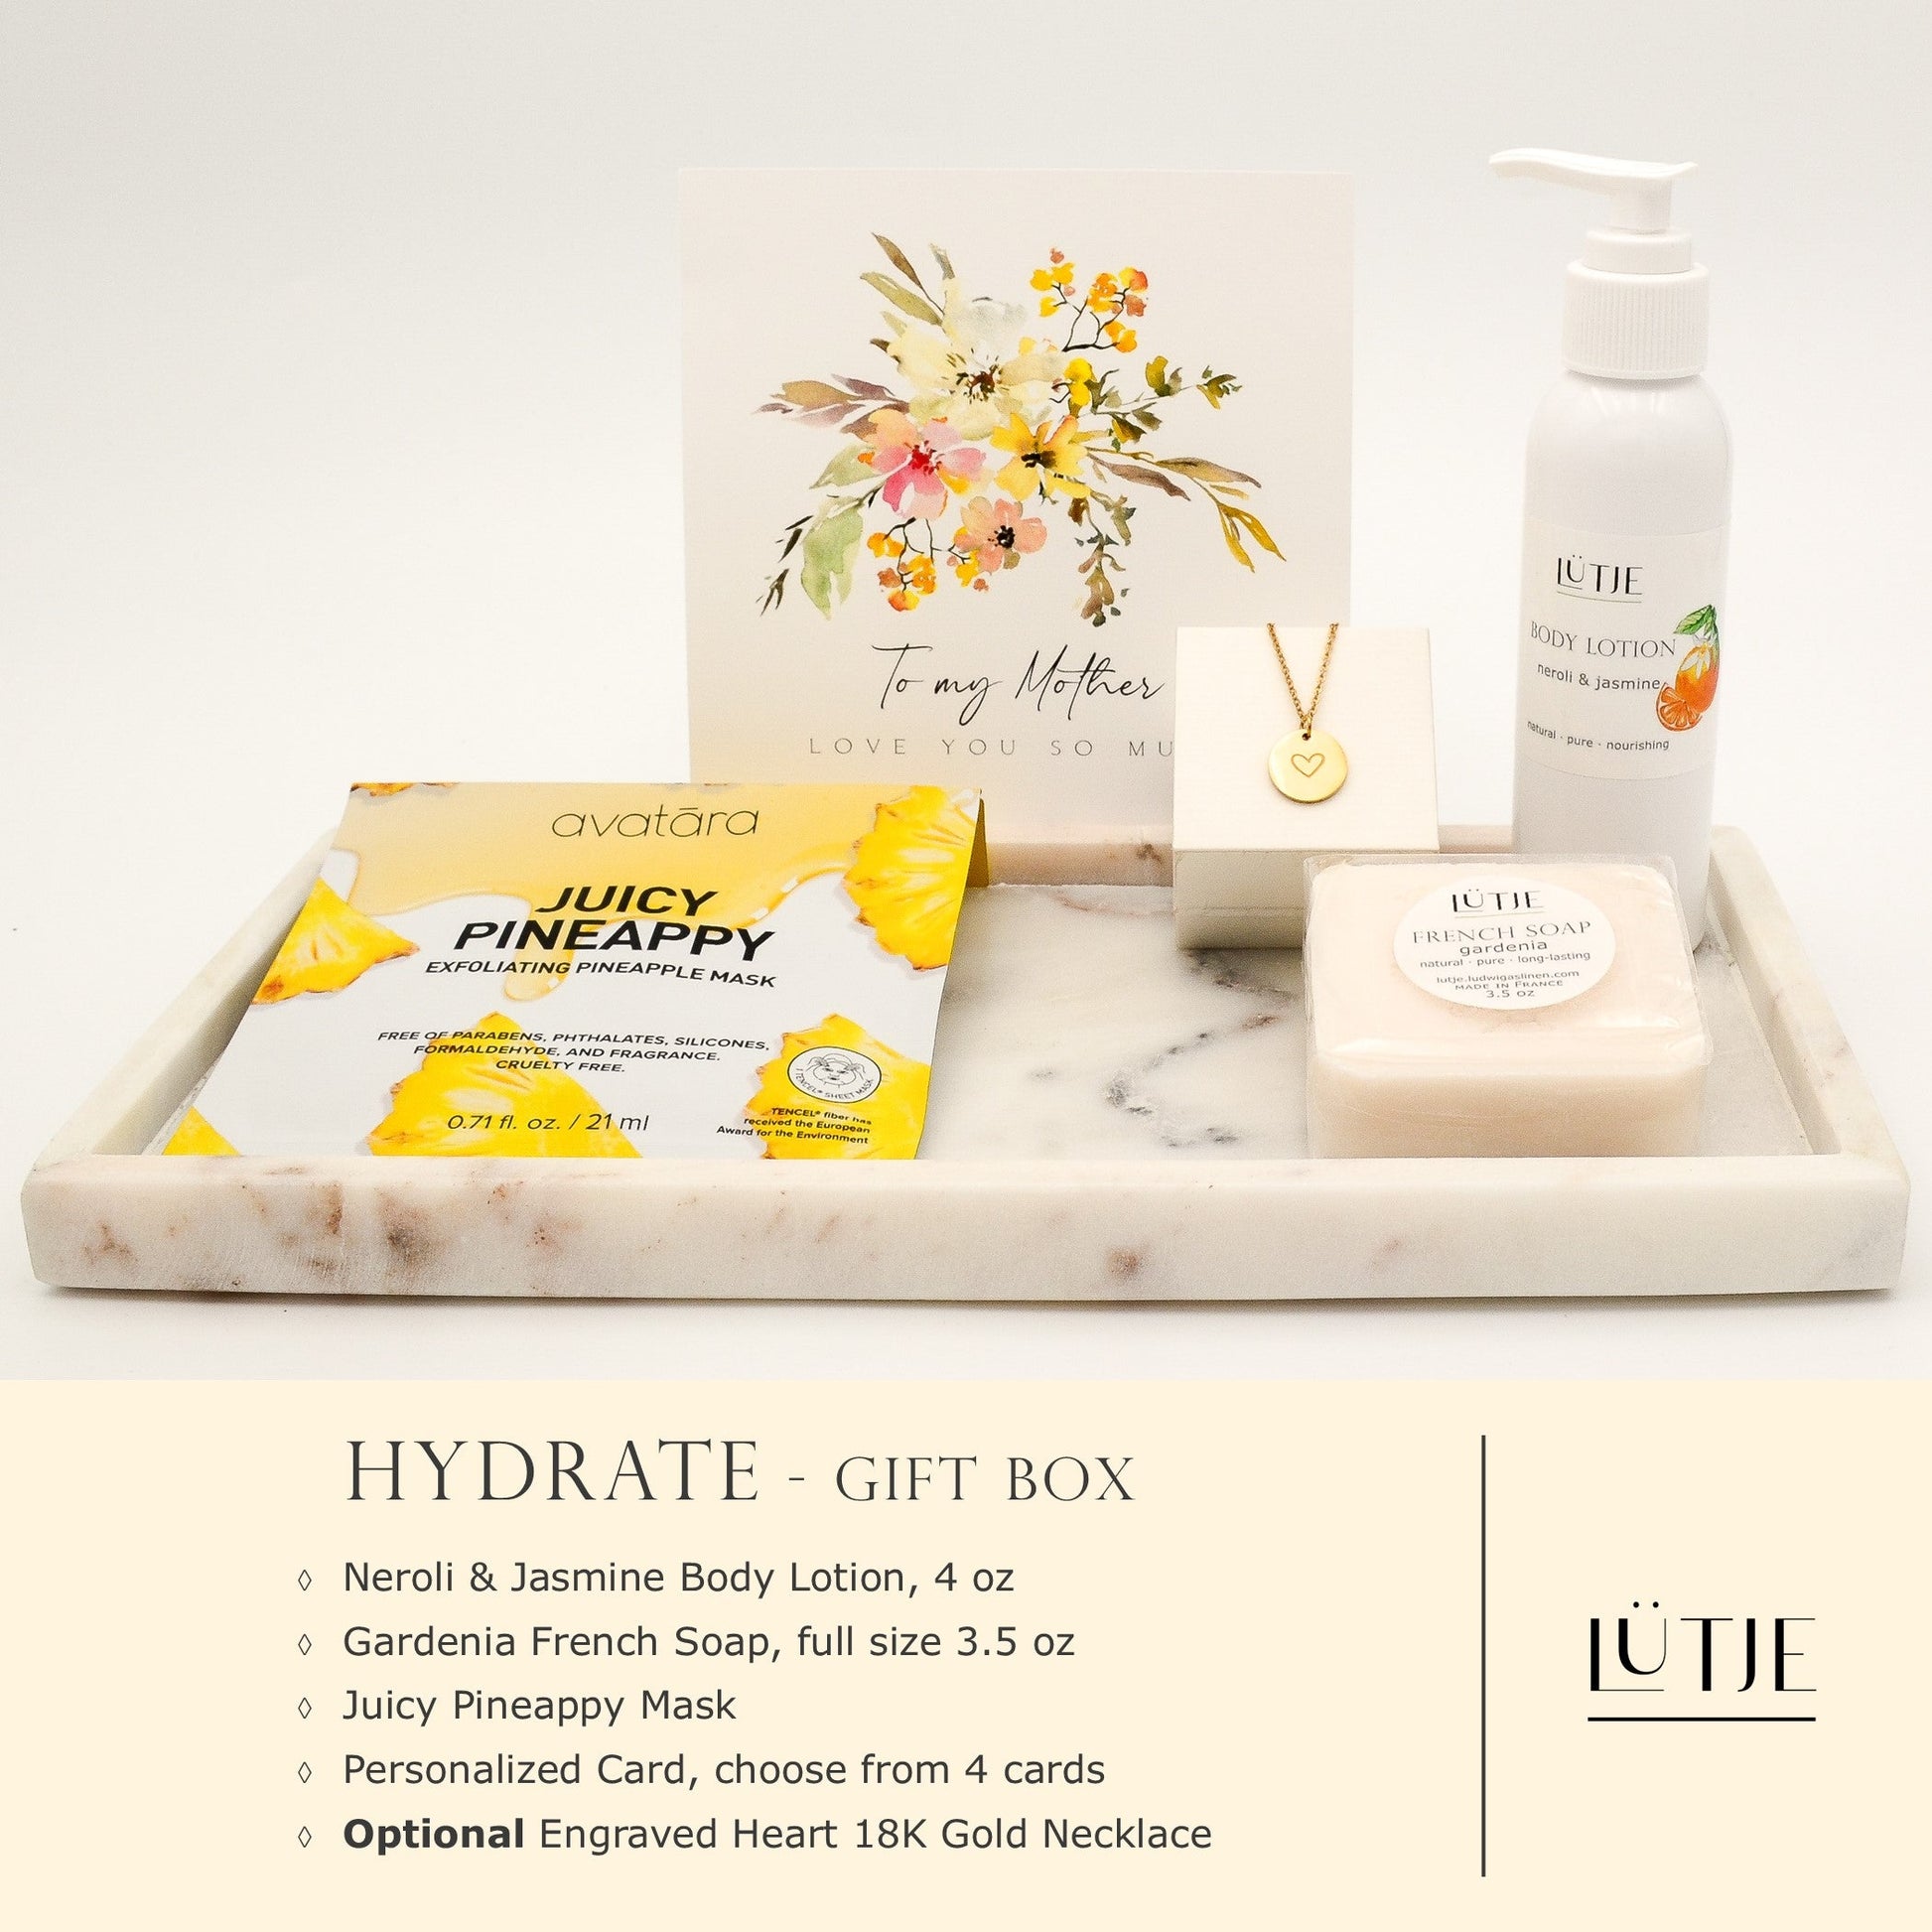 Hydrate Gift Box for women, daughter, mom, BFF, wife, sister or grandma, includes Neroli & Jasmine body lotion, French soap, hydrating face mask, and optional 18K gold-plated necklace with engraved heart.